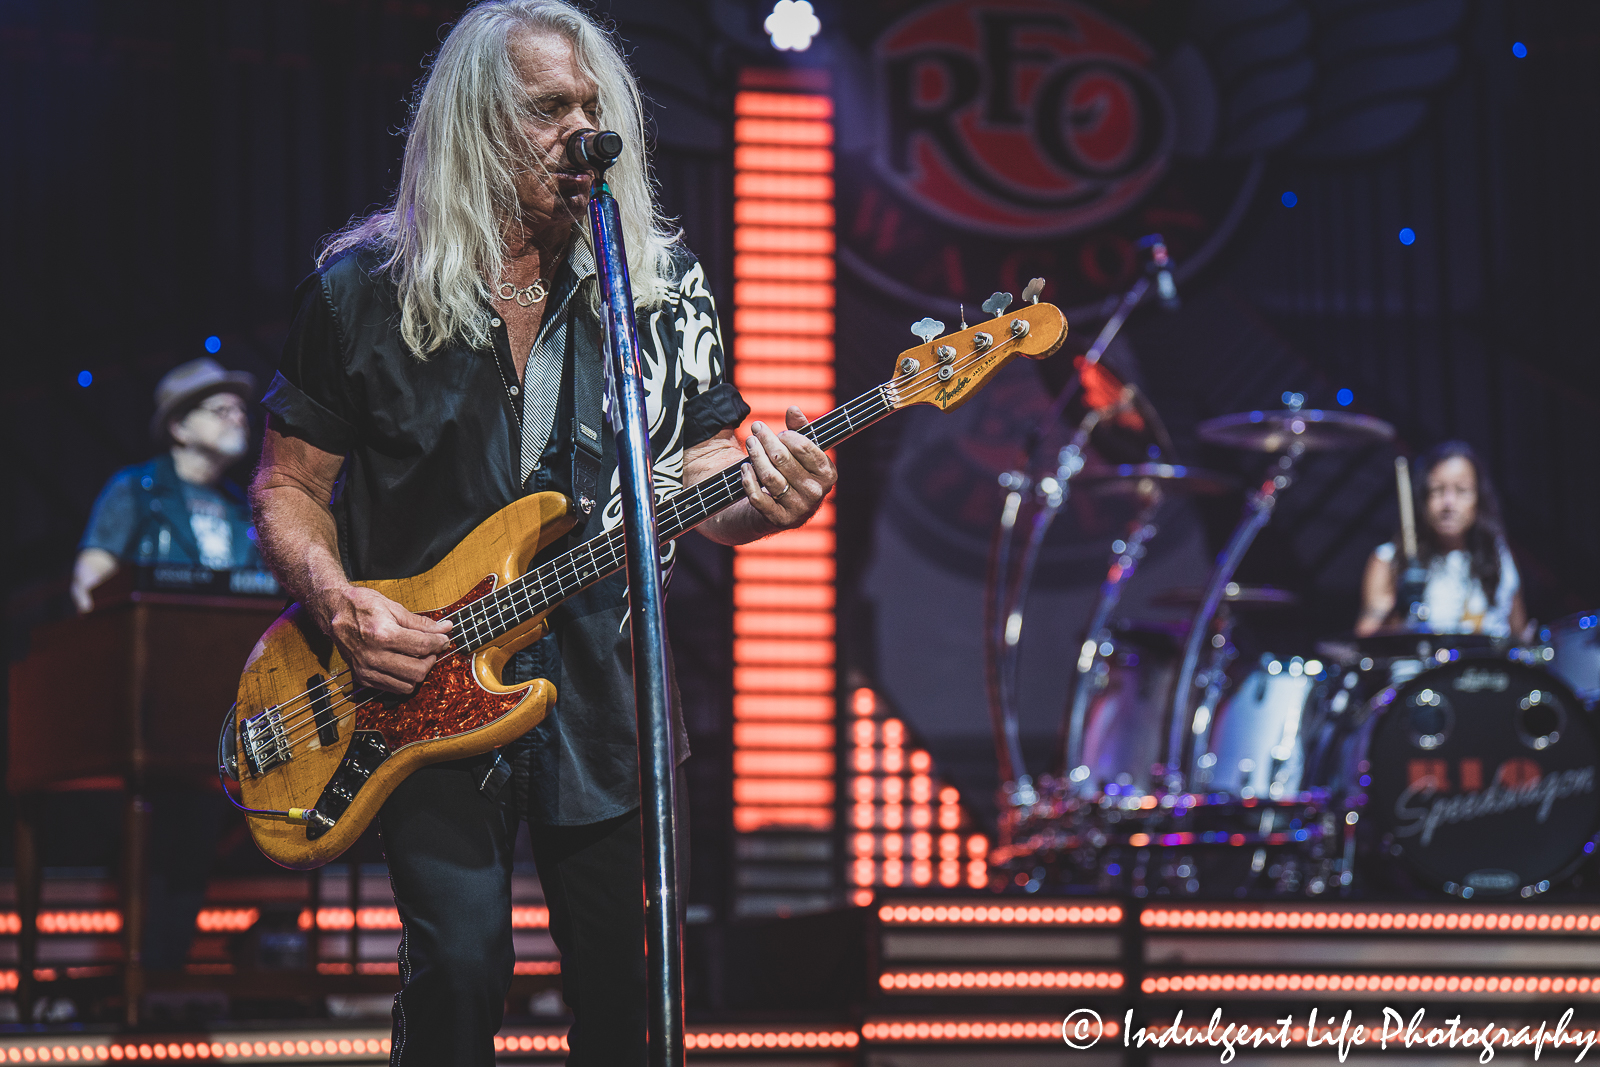 REO Speedwagon bass guitarist Bruce Hall playing live with keyboard player Neal Doughty and drummer Bryan Hitt at Starlight Theatre in Kansas City, MO on June 14, 2022.